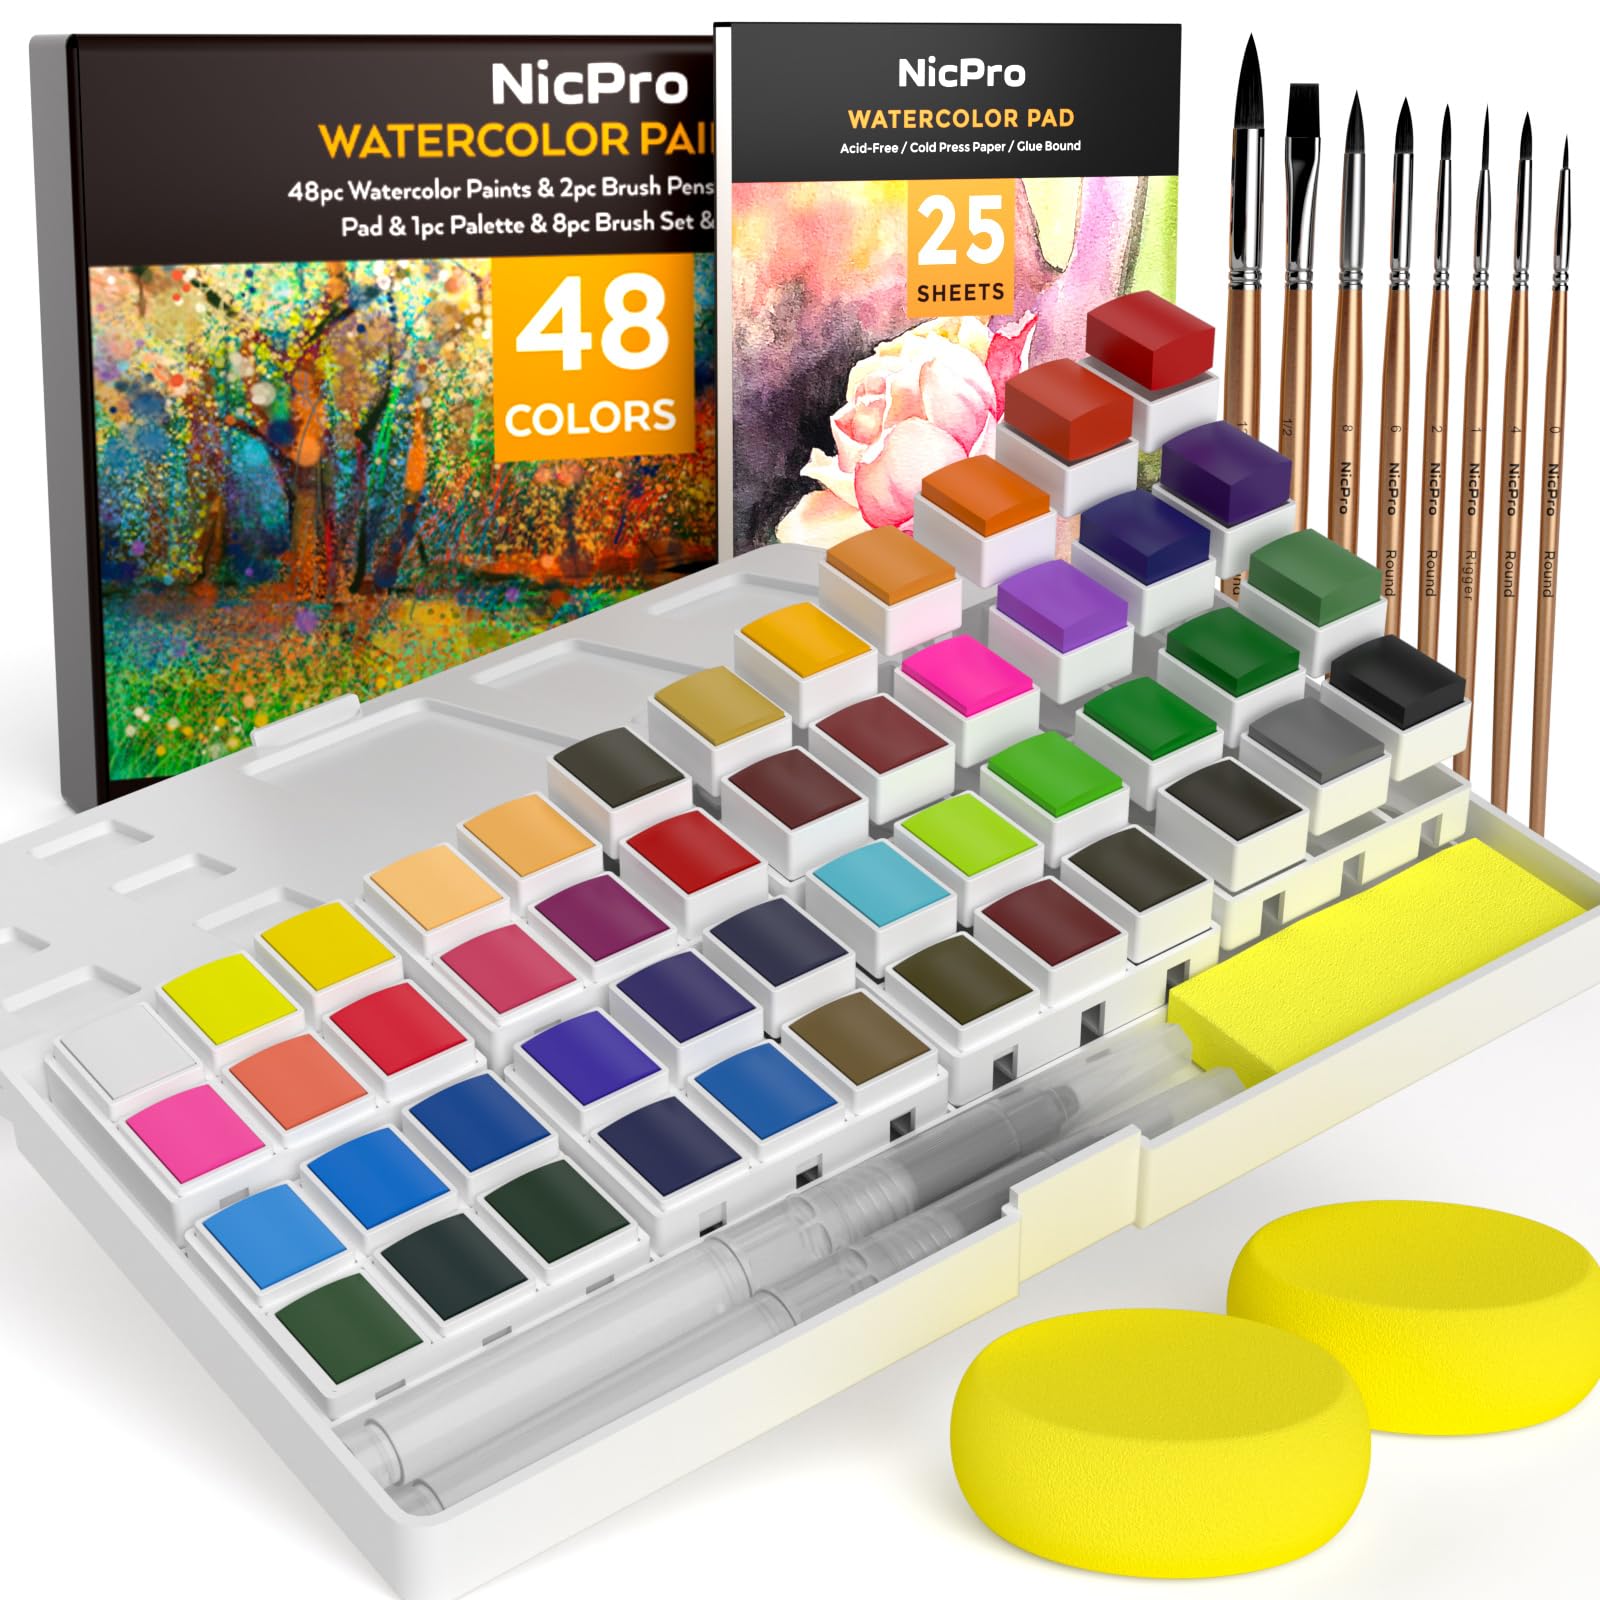 Nicpro 48 Colors Watercolor Paint Set with 8PCS Squirrel Painting Brus